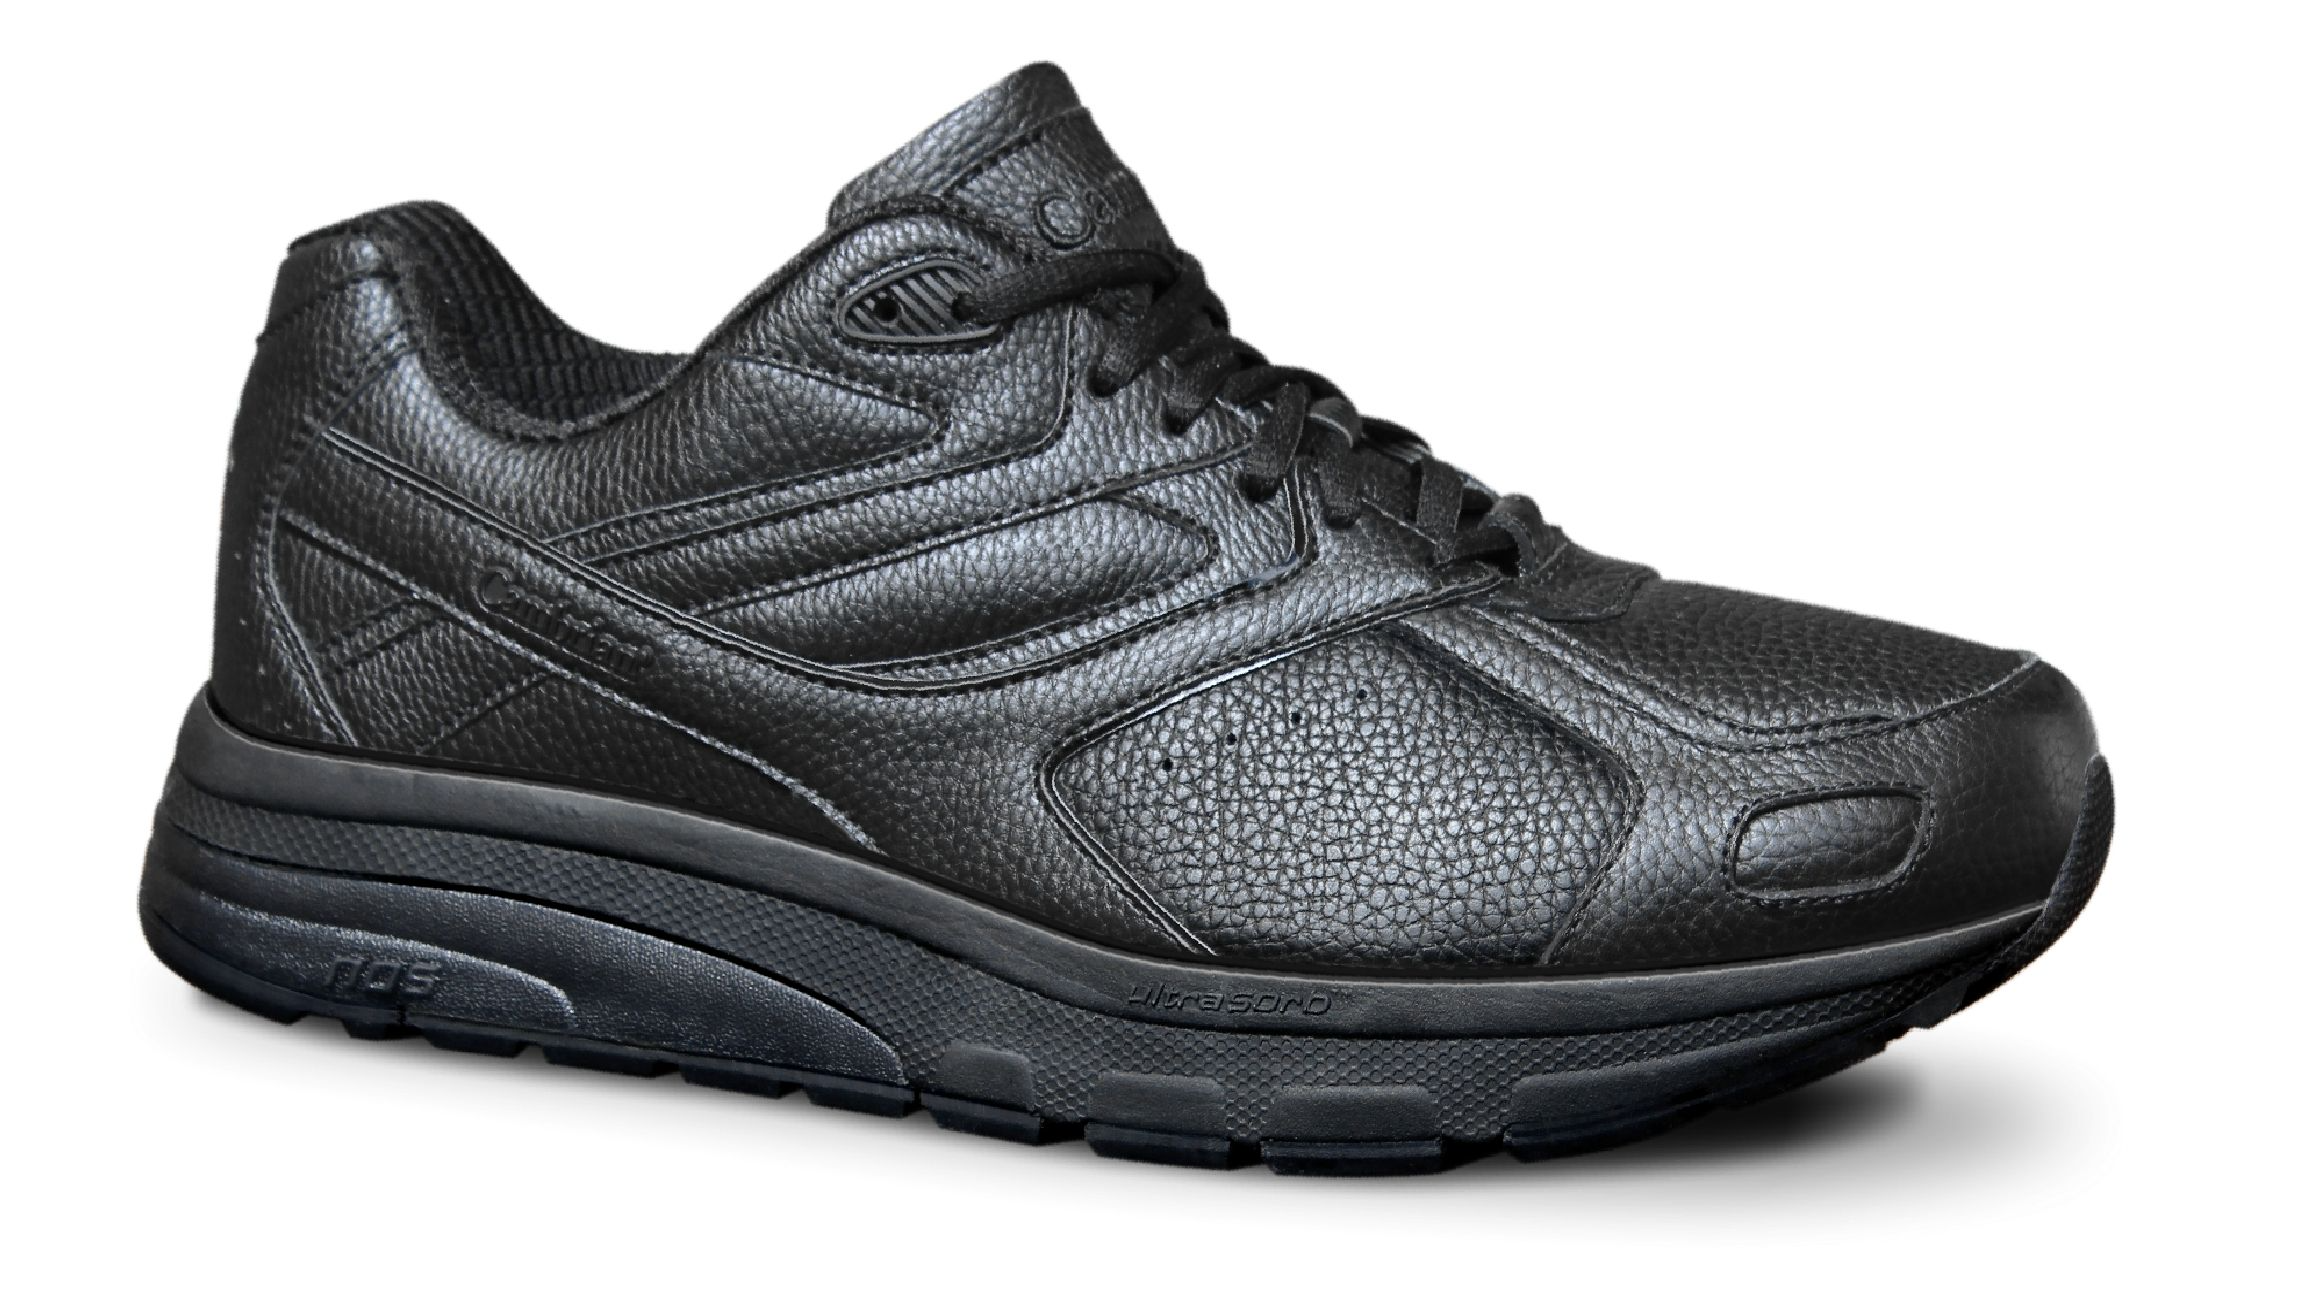 Cambrian Ultra Black leather (Ultimate walking shoe)